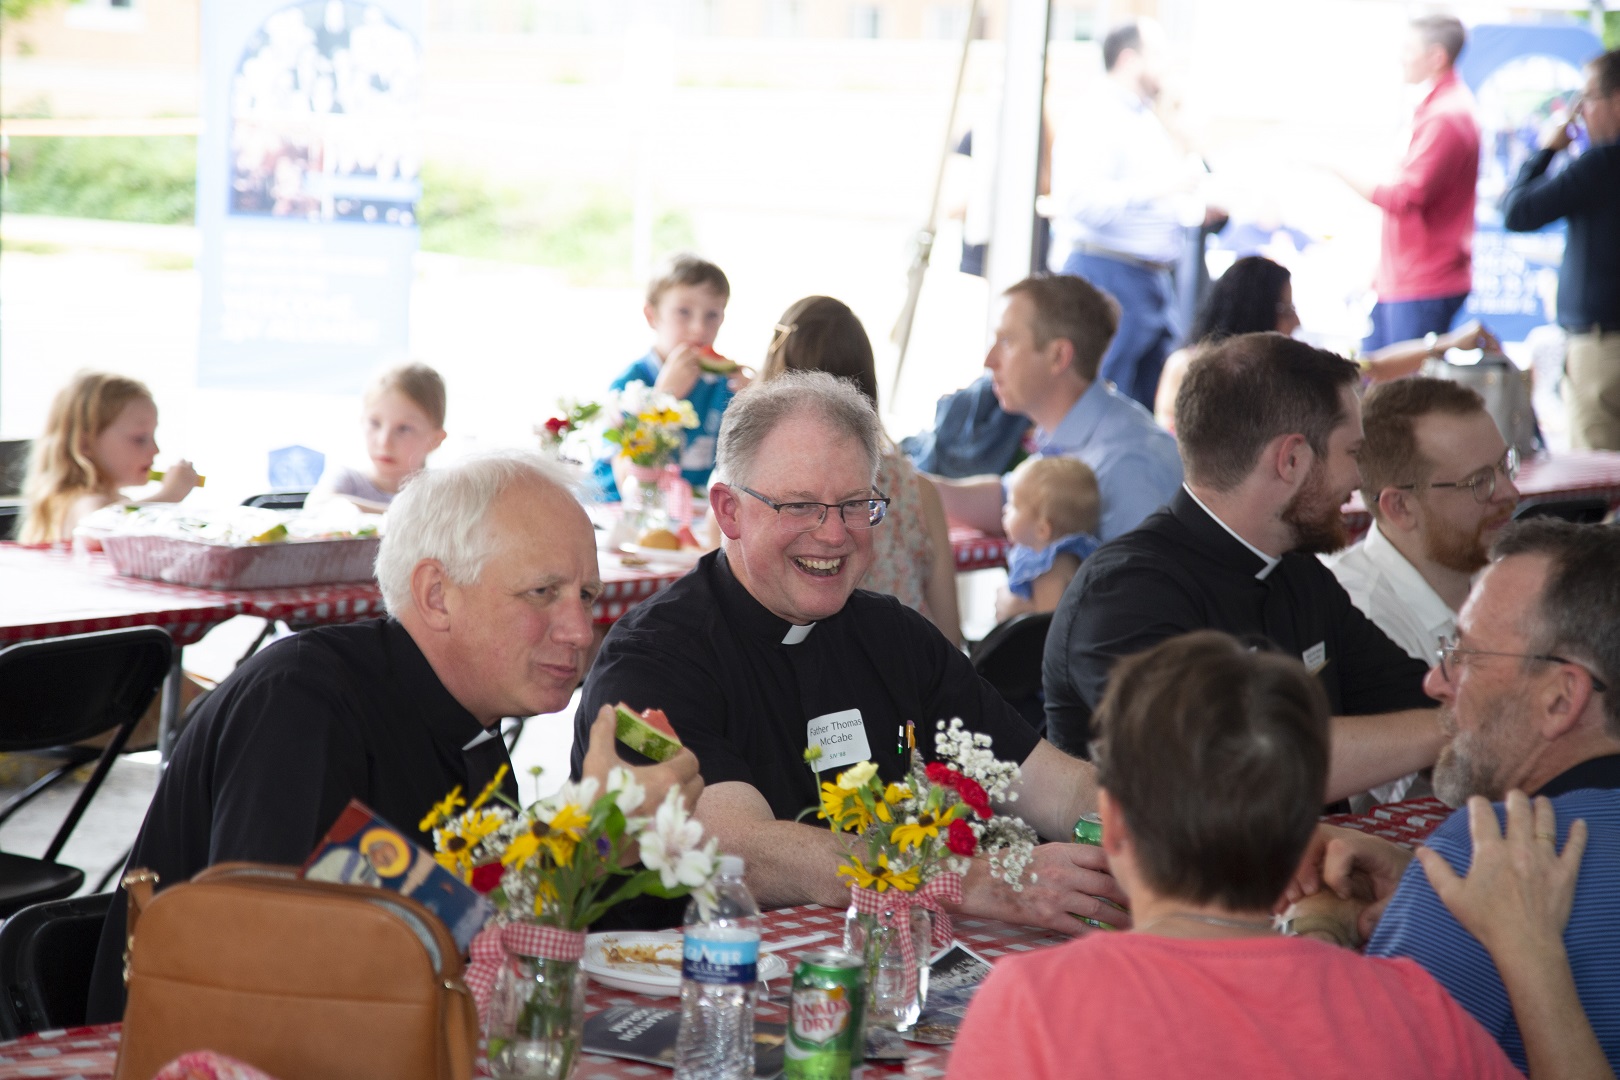 Father John Gerritts and Father Thomas McCabe eating.